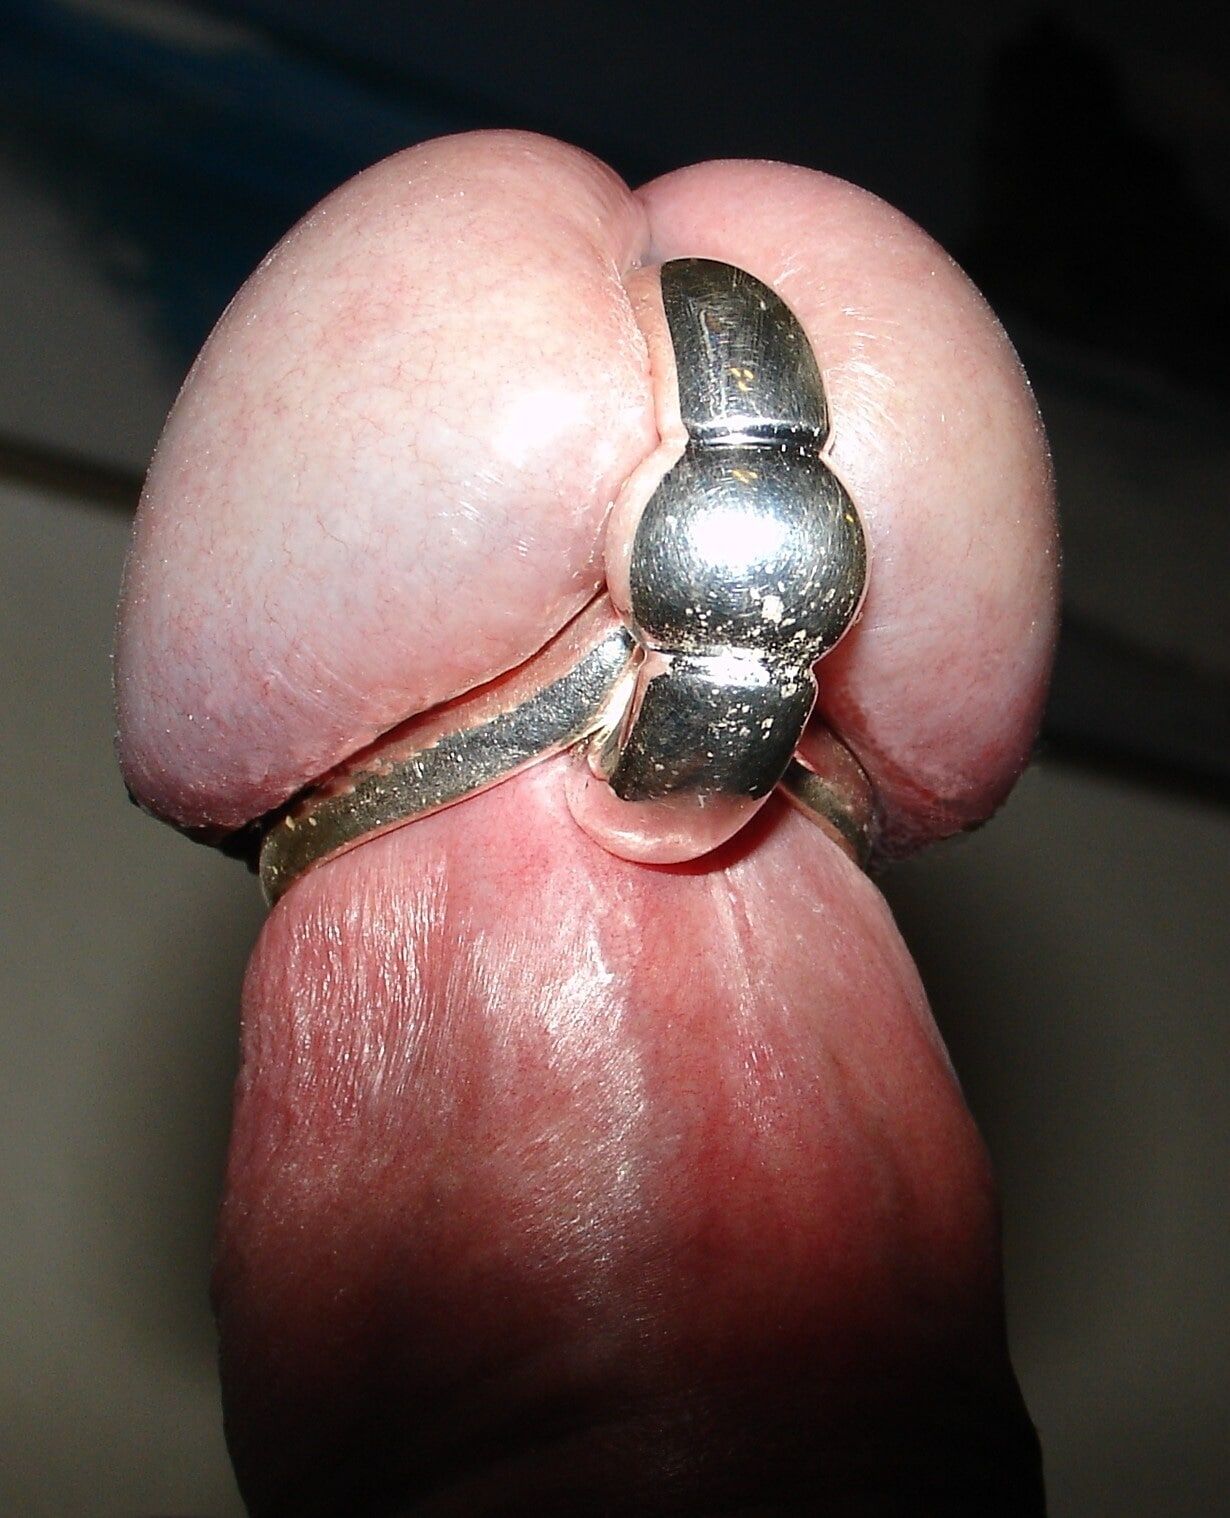 My cock with jewelry #37